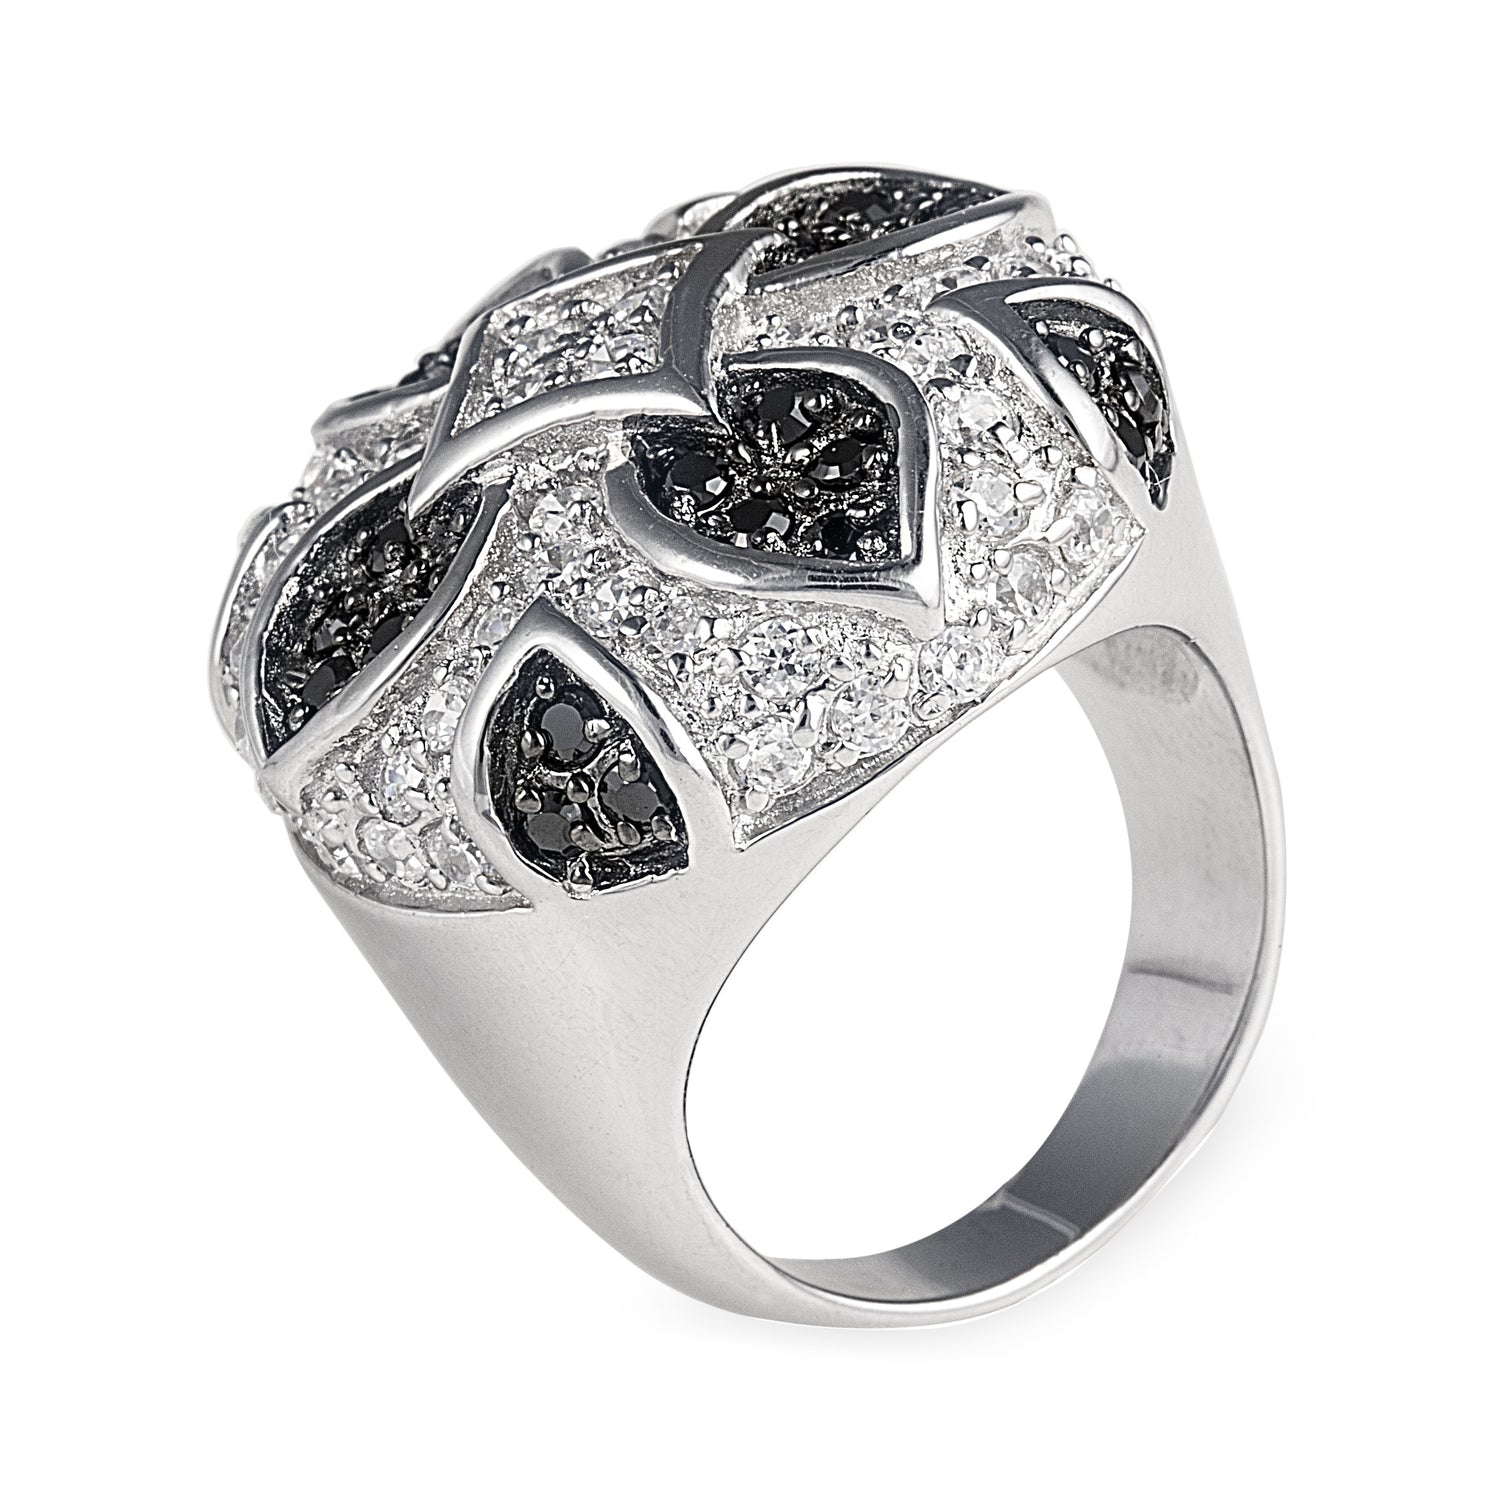 A Parisian work of art - this 925 Sterling Silver ring features a vintage geometric design dripping with black and clear facet cut Cubic Zirconia stones. Worldwide shipping.